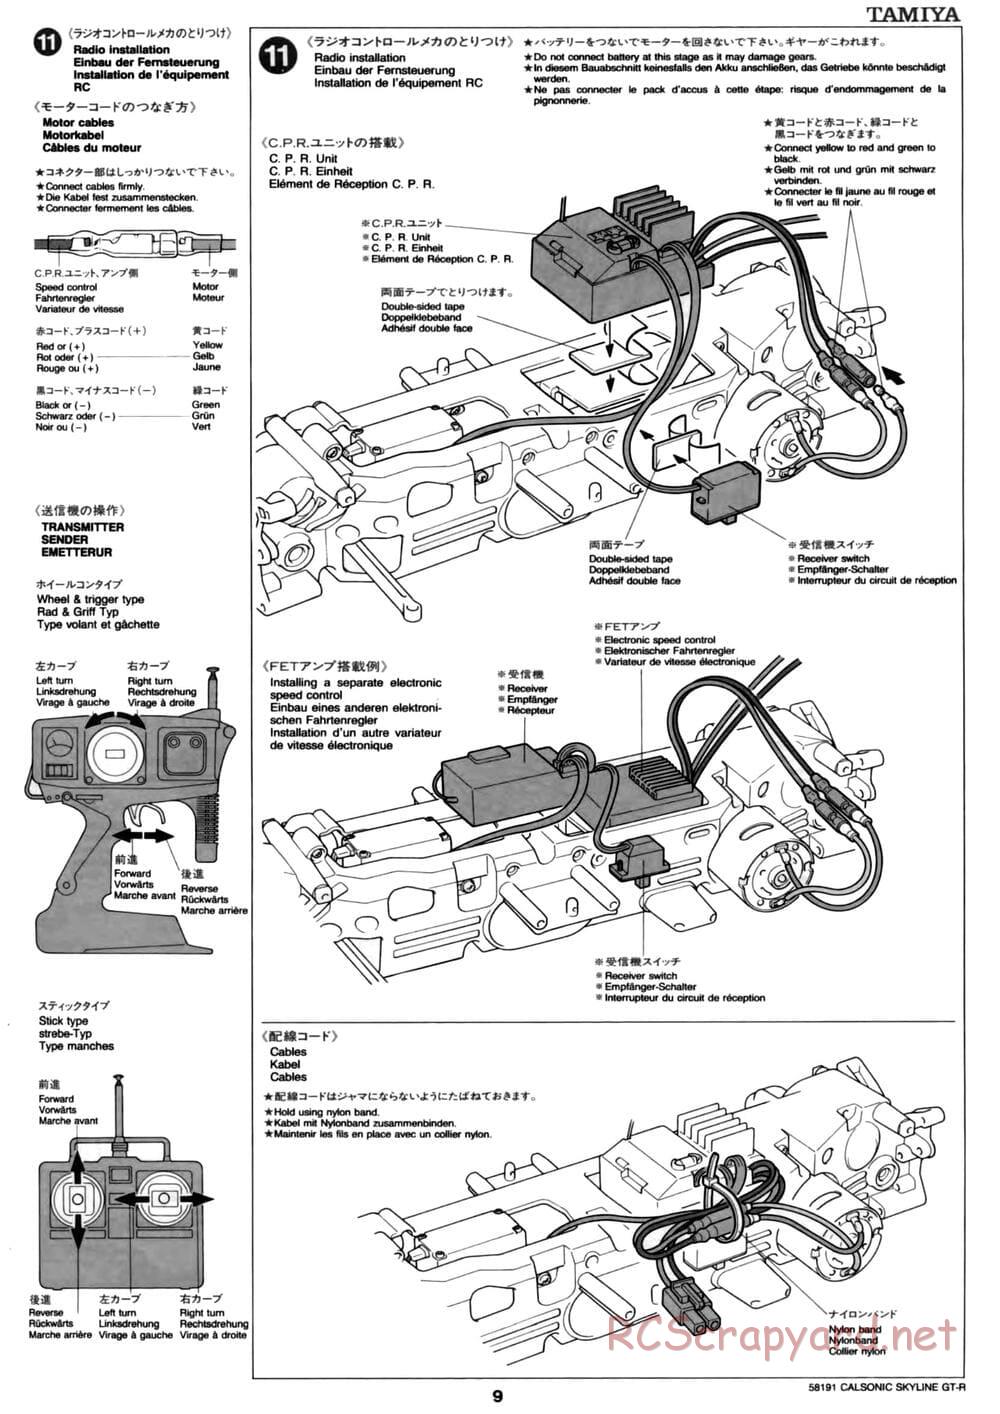 Tamiya - Calsonic Skyline GT-R - TL-01 Chassis - Manual - Page 9